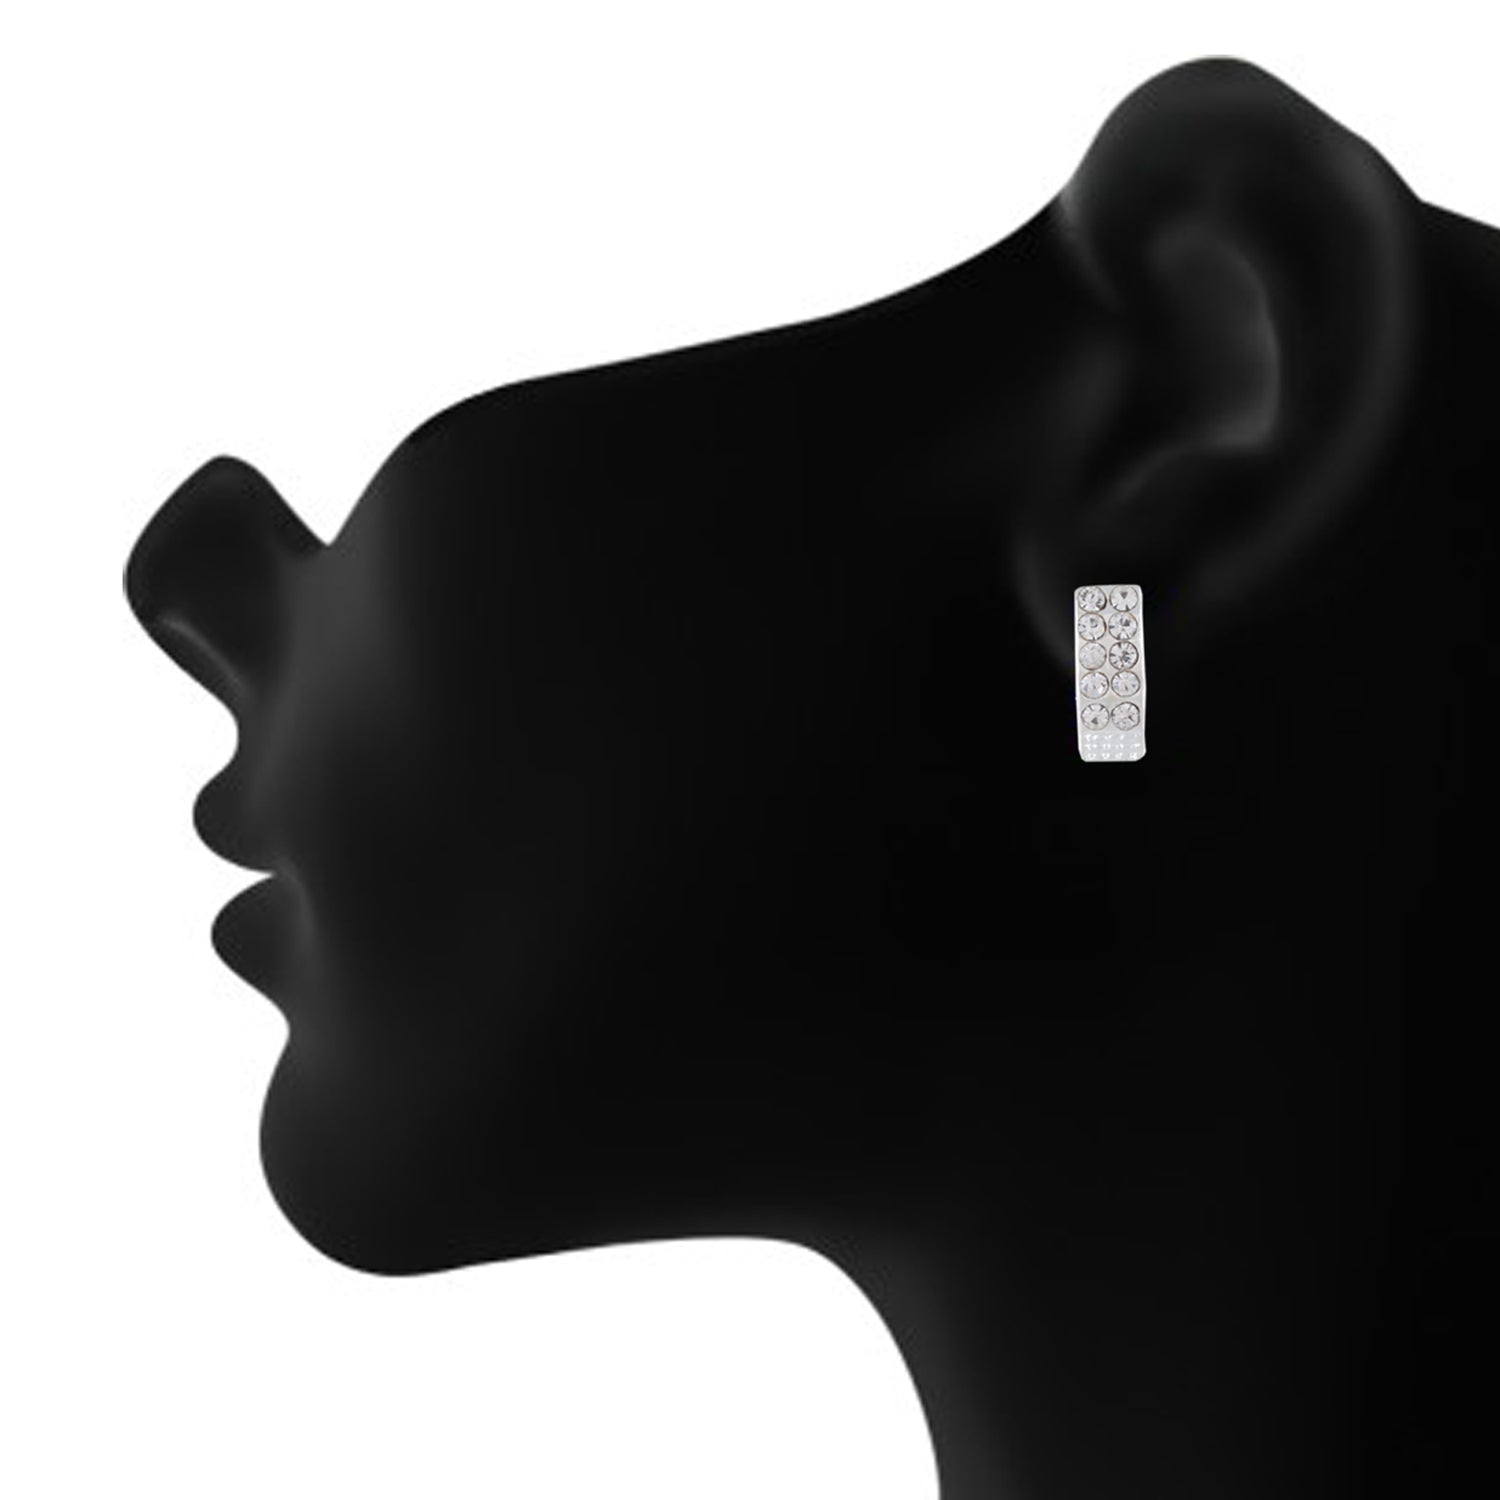 Silver colour Rectangle design  Studs for girls and women